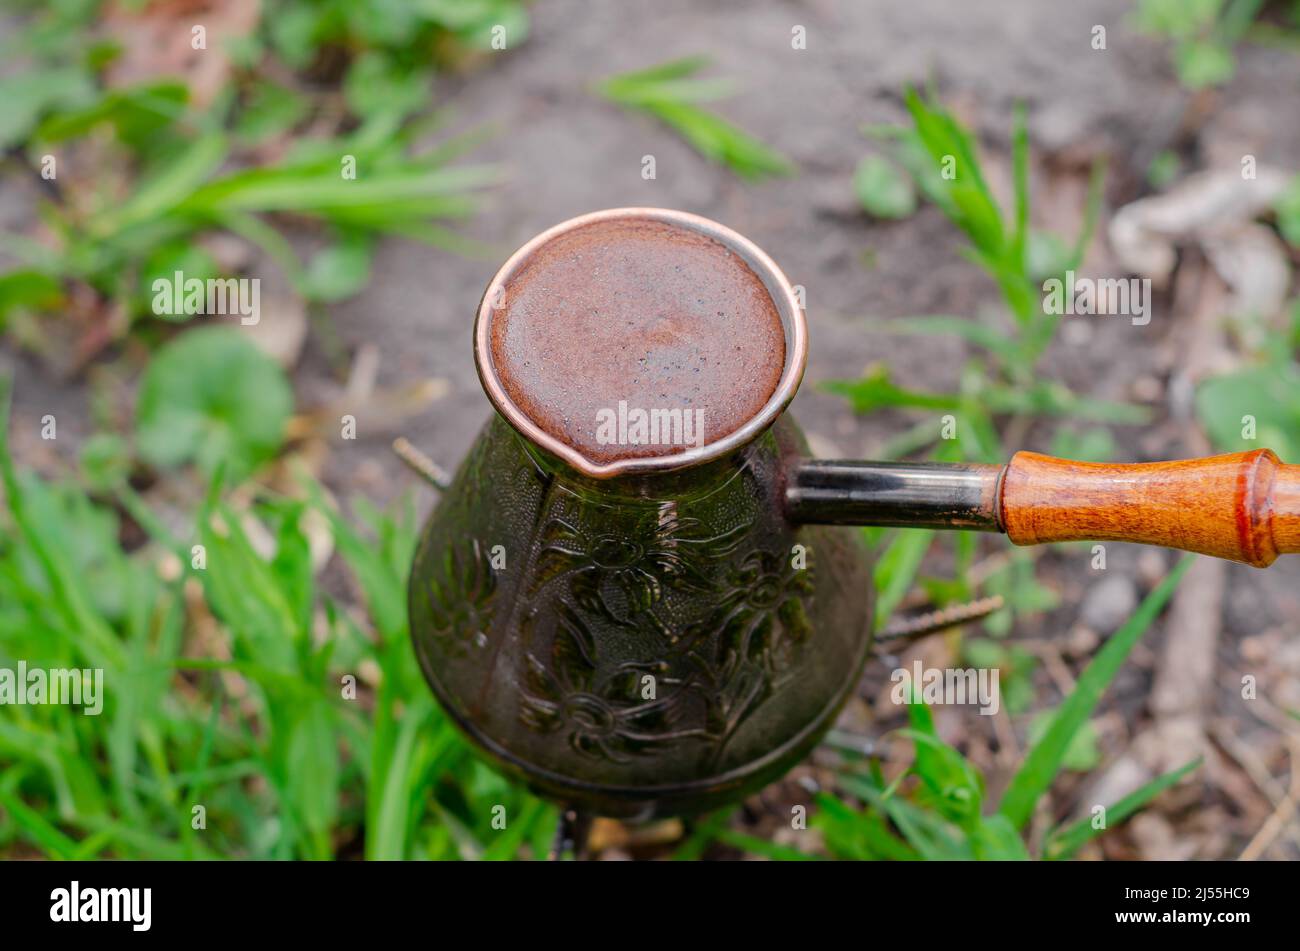 Aromatic delicious coffee in copper patterned turk with wooden handle. Coffee in the woods on grass. Top view close up Stock Photo